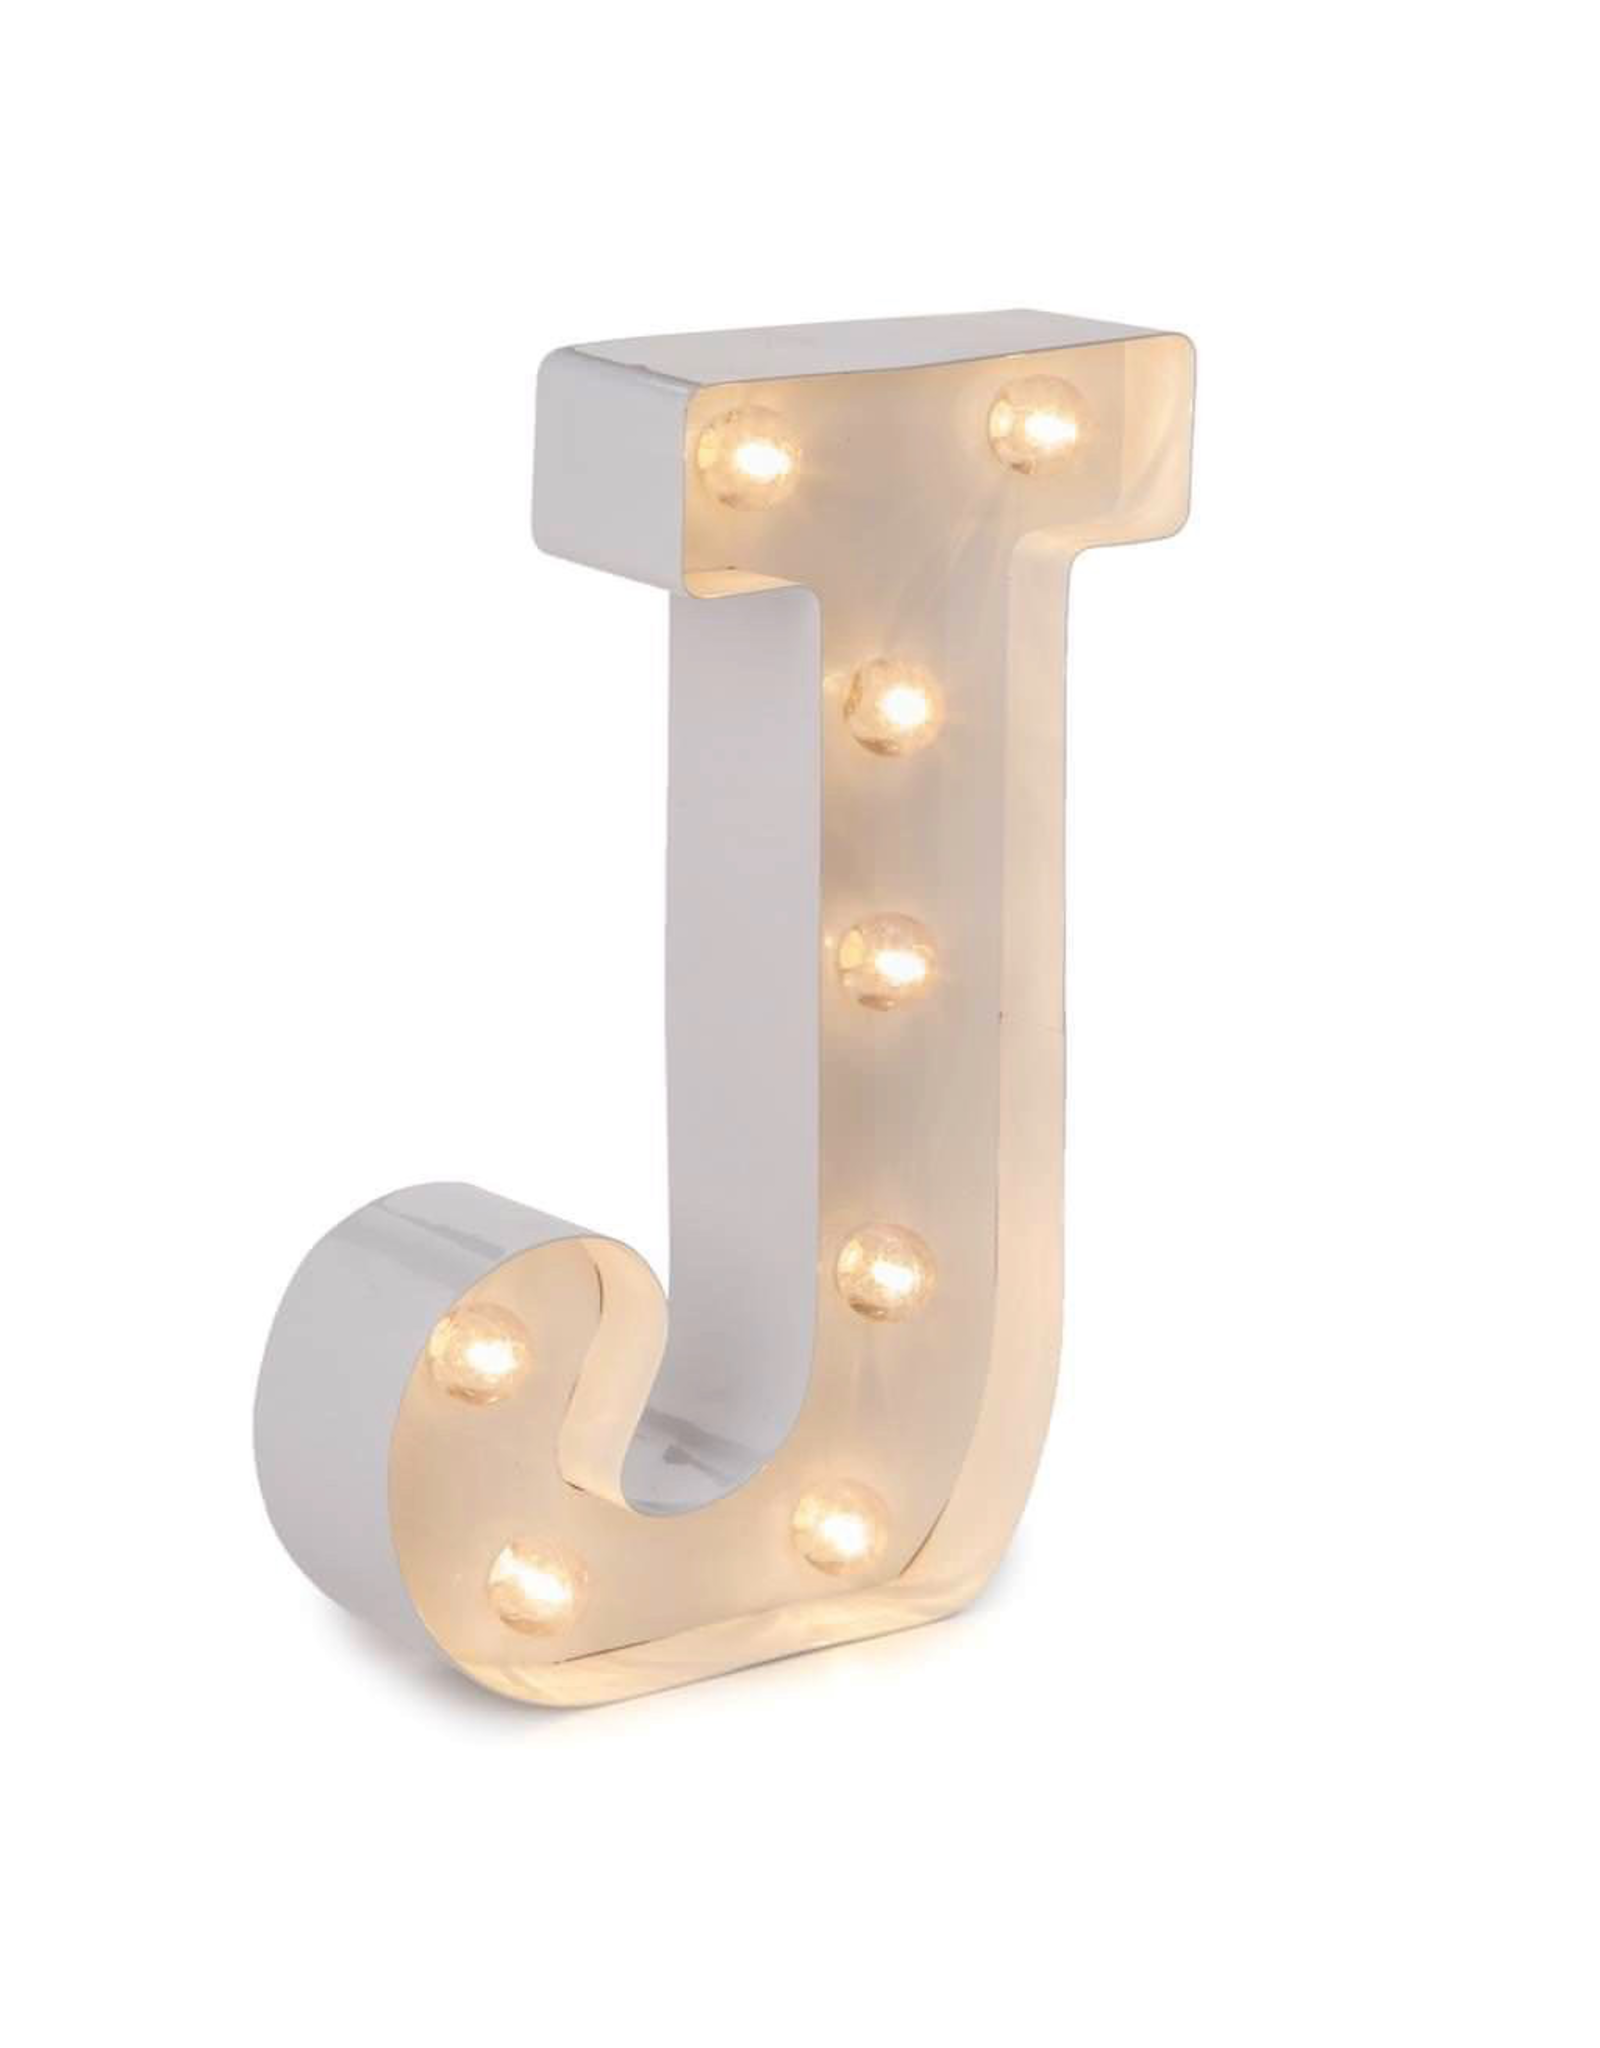 Darice LED Light Up Marquee Letter J 5915-787 White Metal